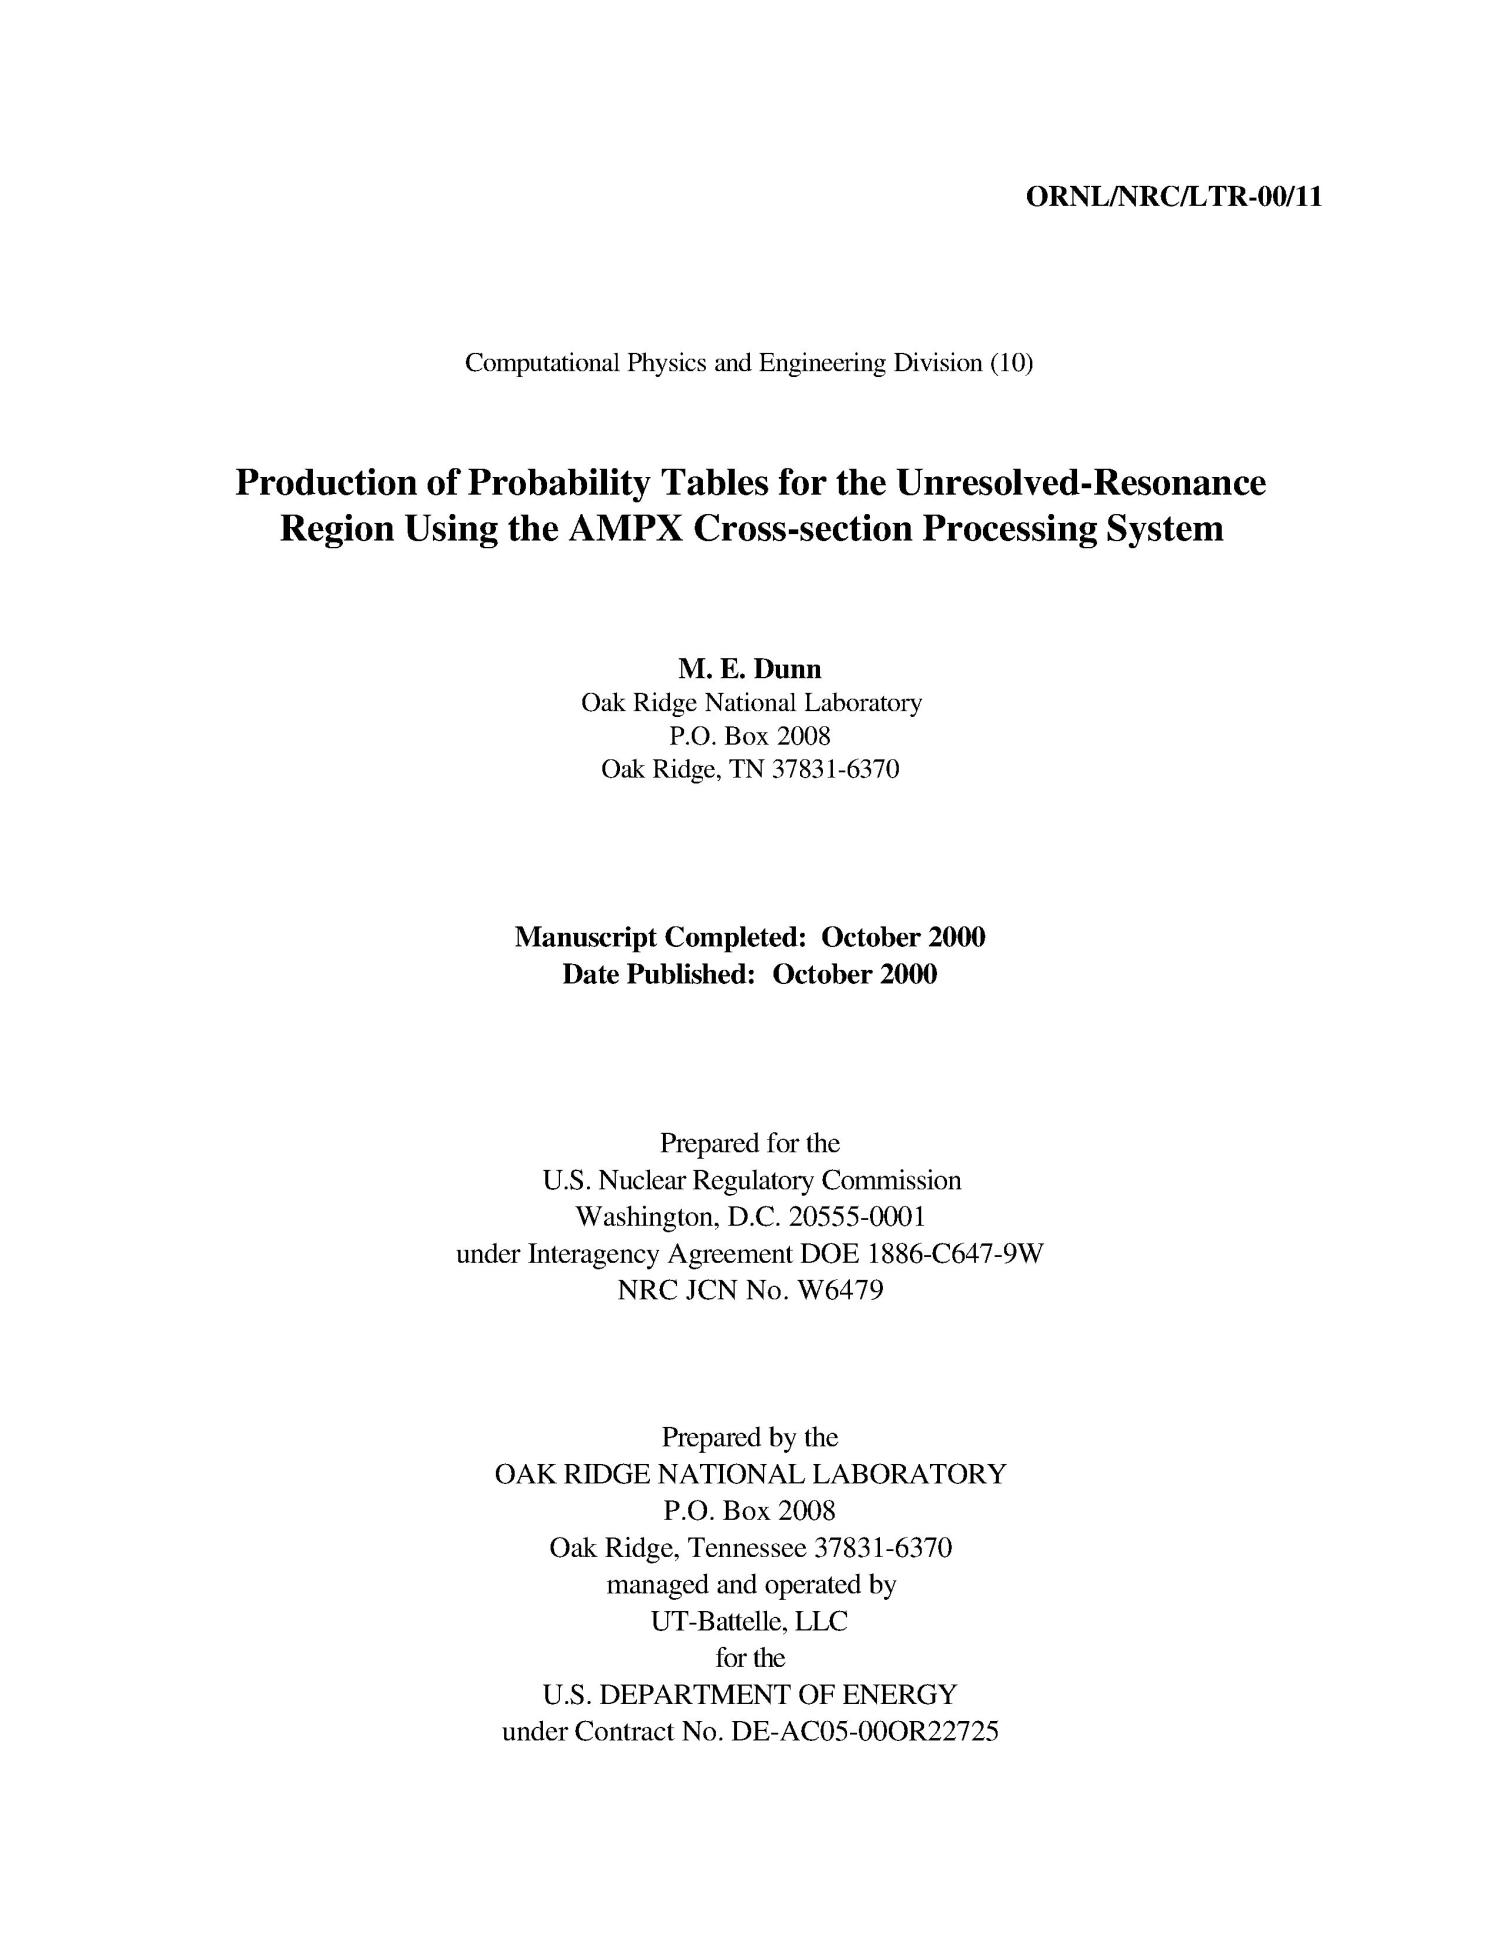 Production of Probability Tables for the Unresolved-Resonance Region Using the AMPX Cross-section Processing System
                                                
                                                    [Sequence #]: 3 of 50
                                                